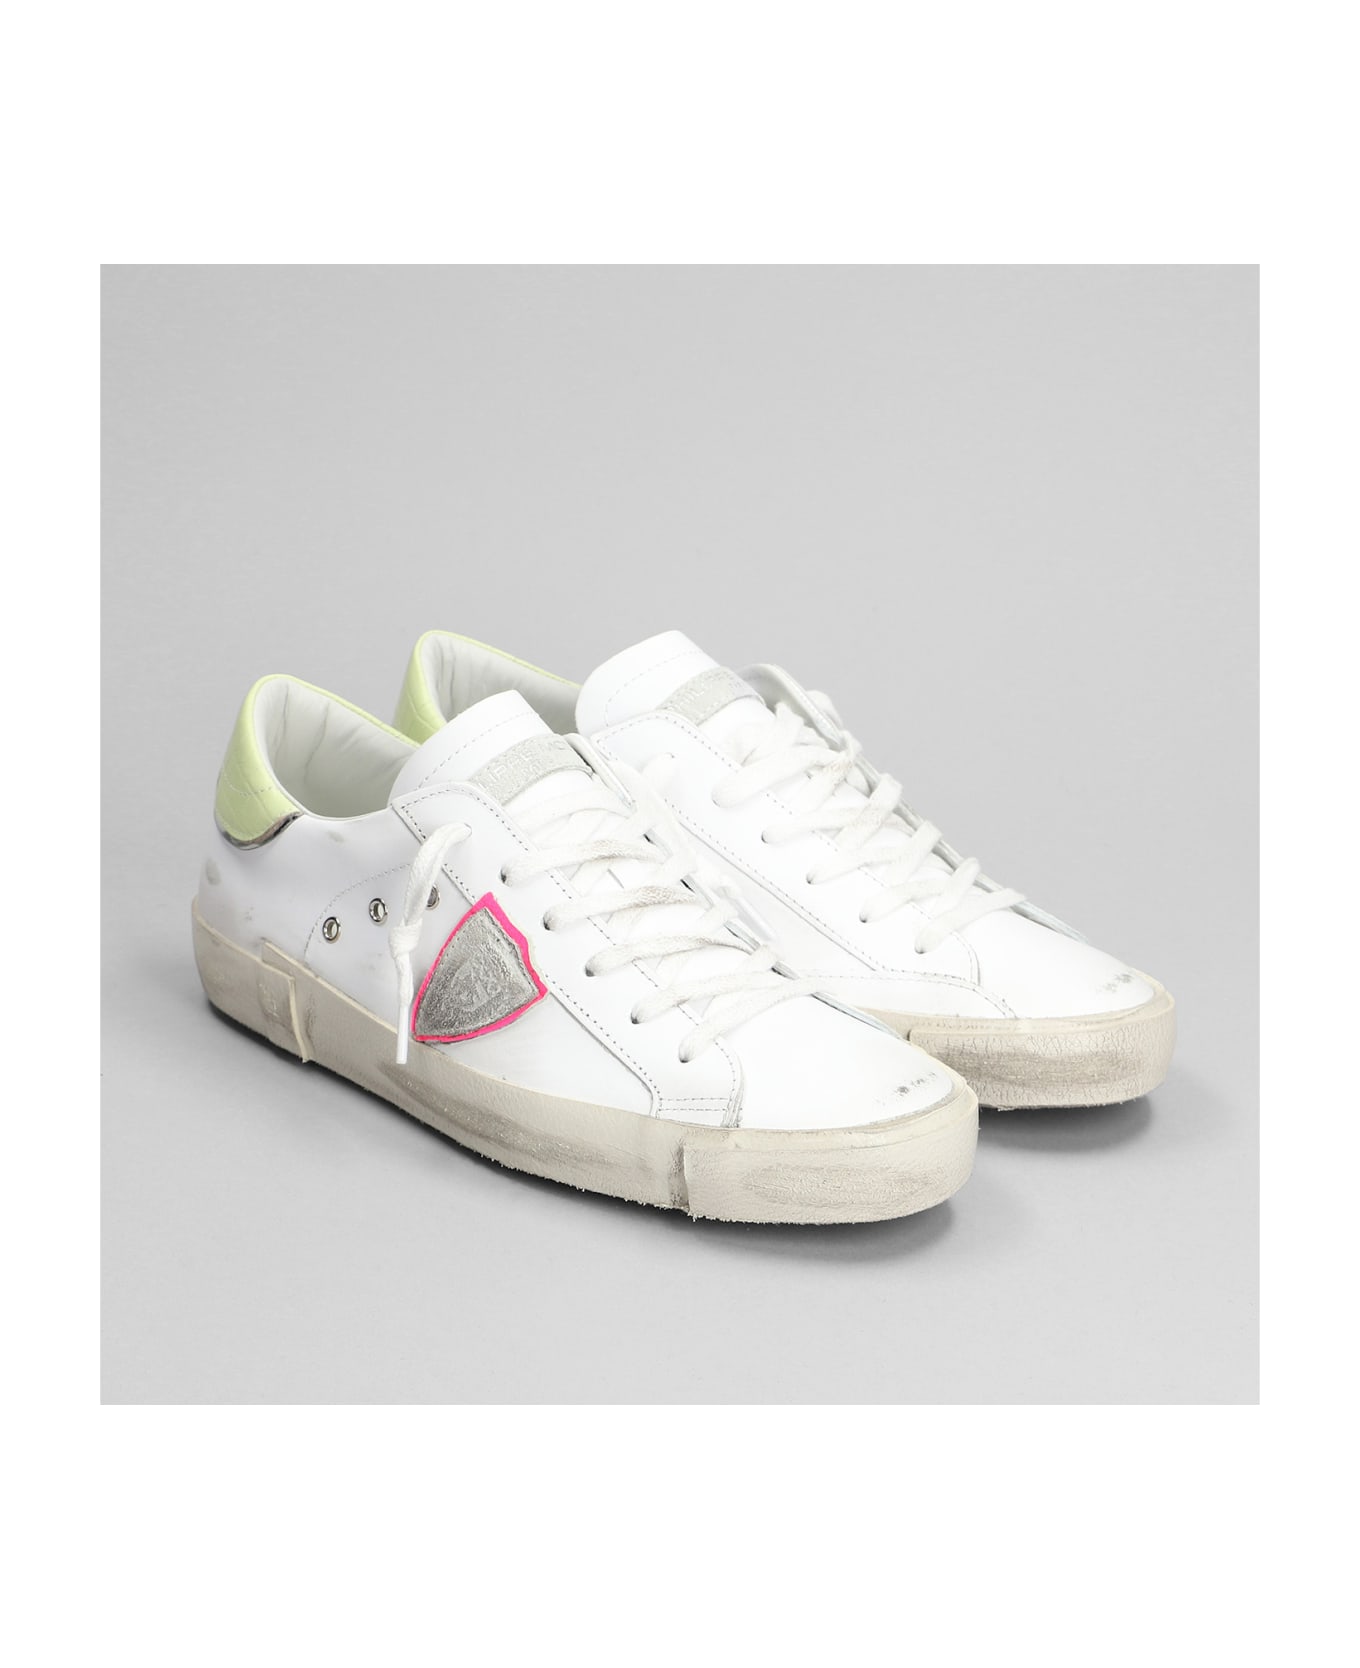 Philippe Model Prsx Low Sneakers In White Leather - white スニーカー